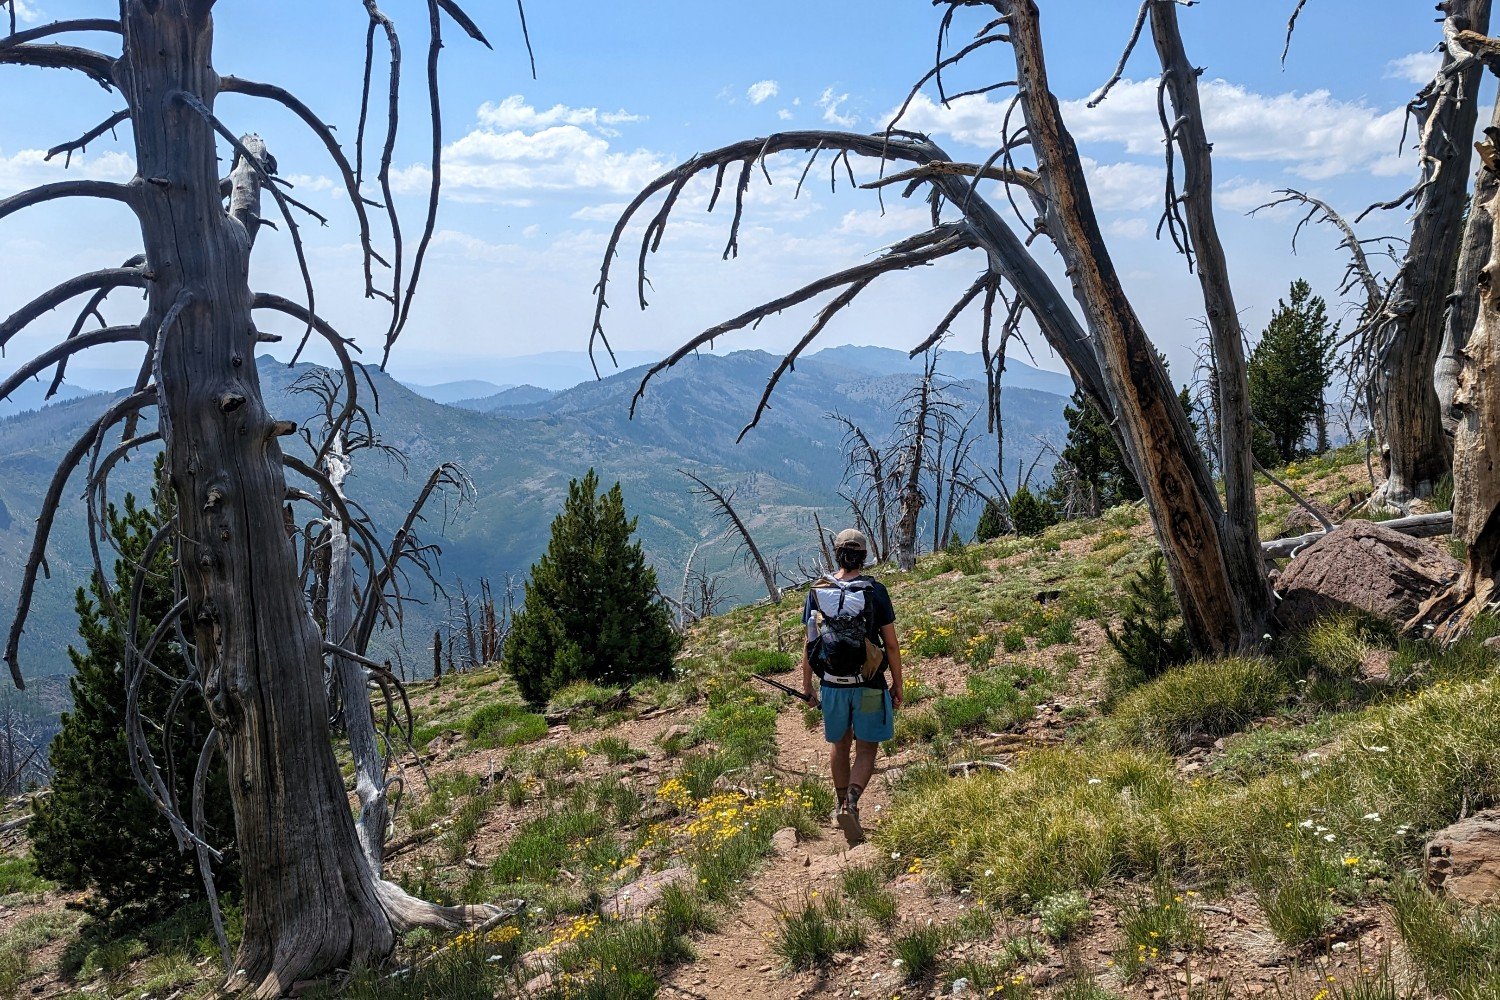 A hiker walking down a trail with some burned trees - theres a view of cascading mountains in the background